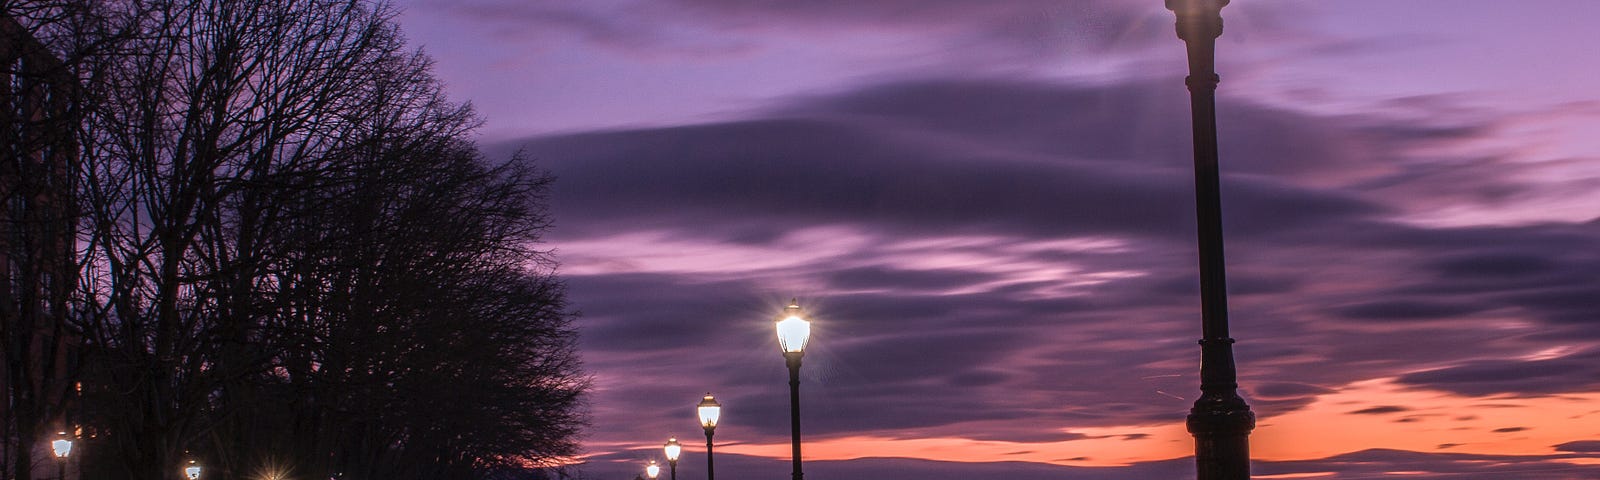 Purple tinted sky from sunset over river and street lined with lamps and trees